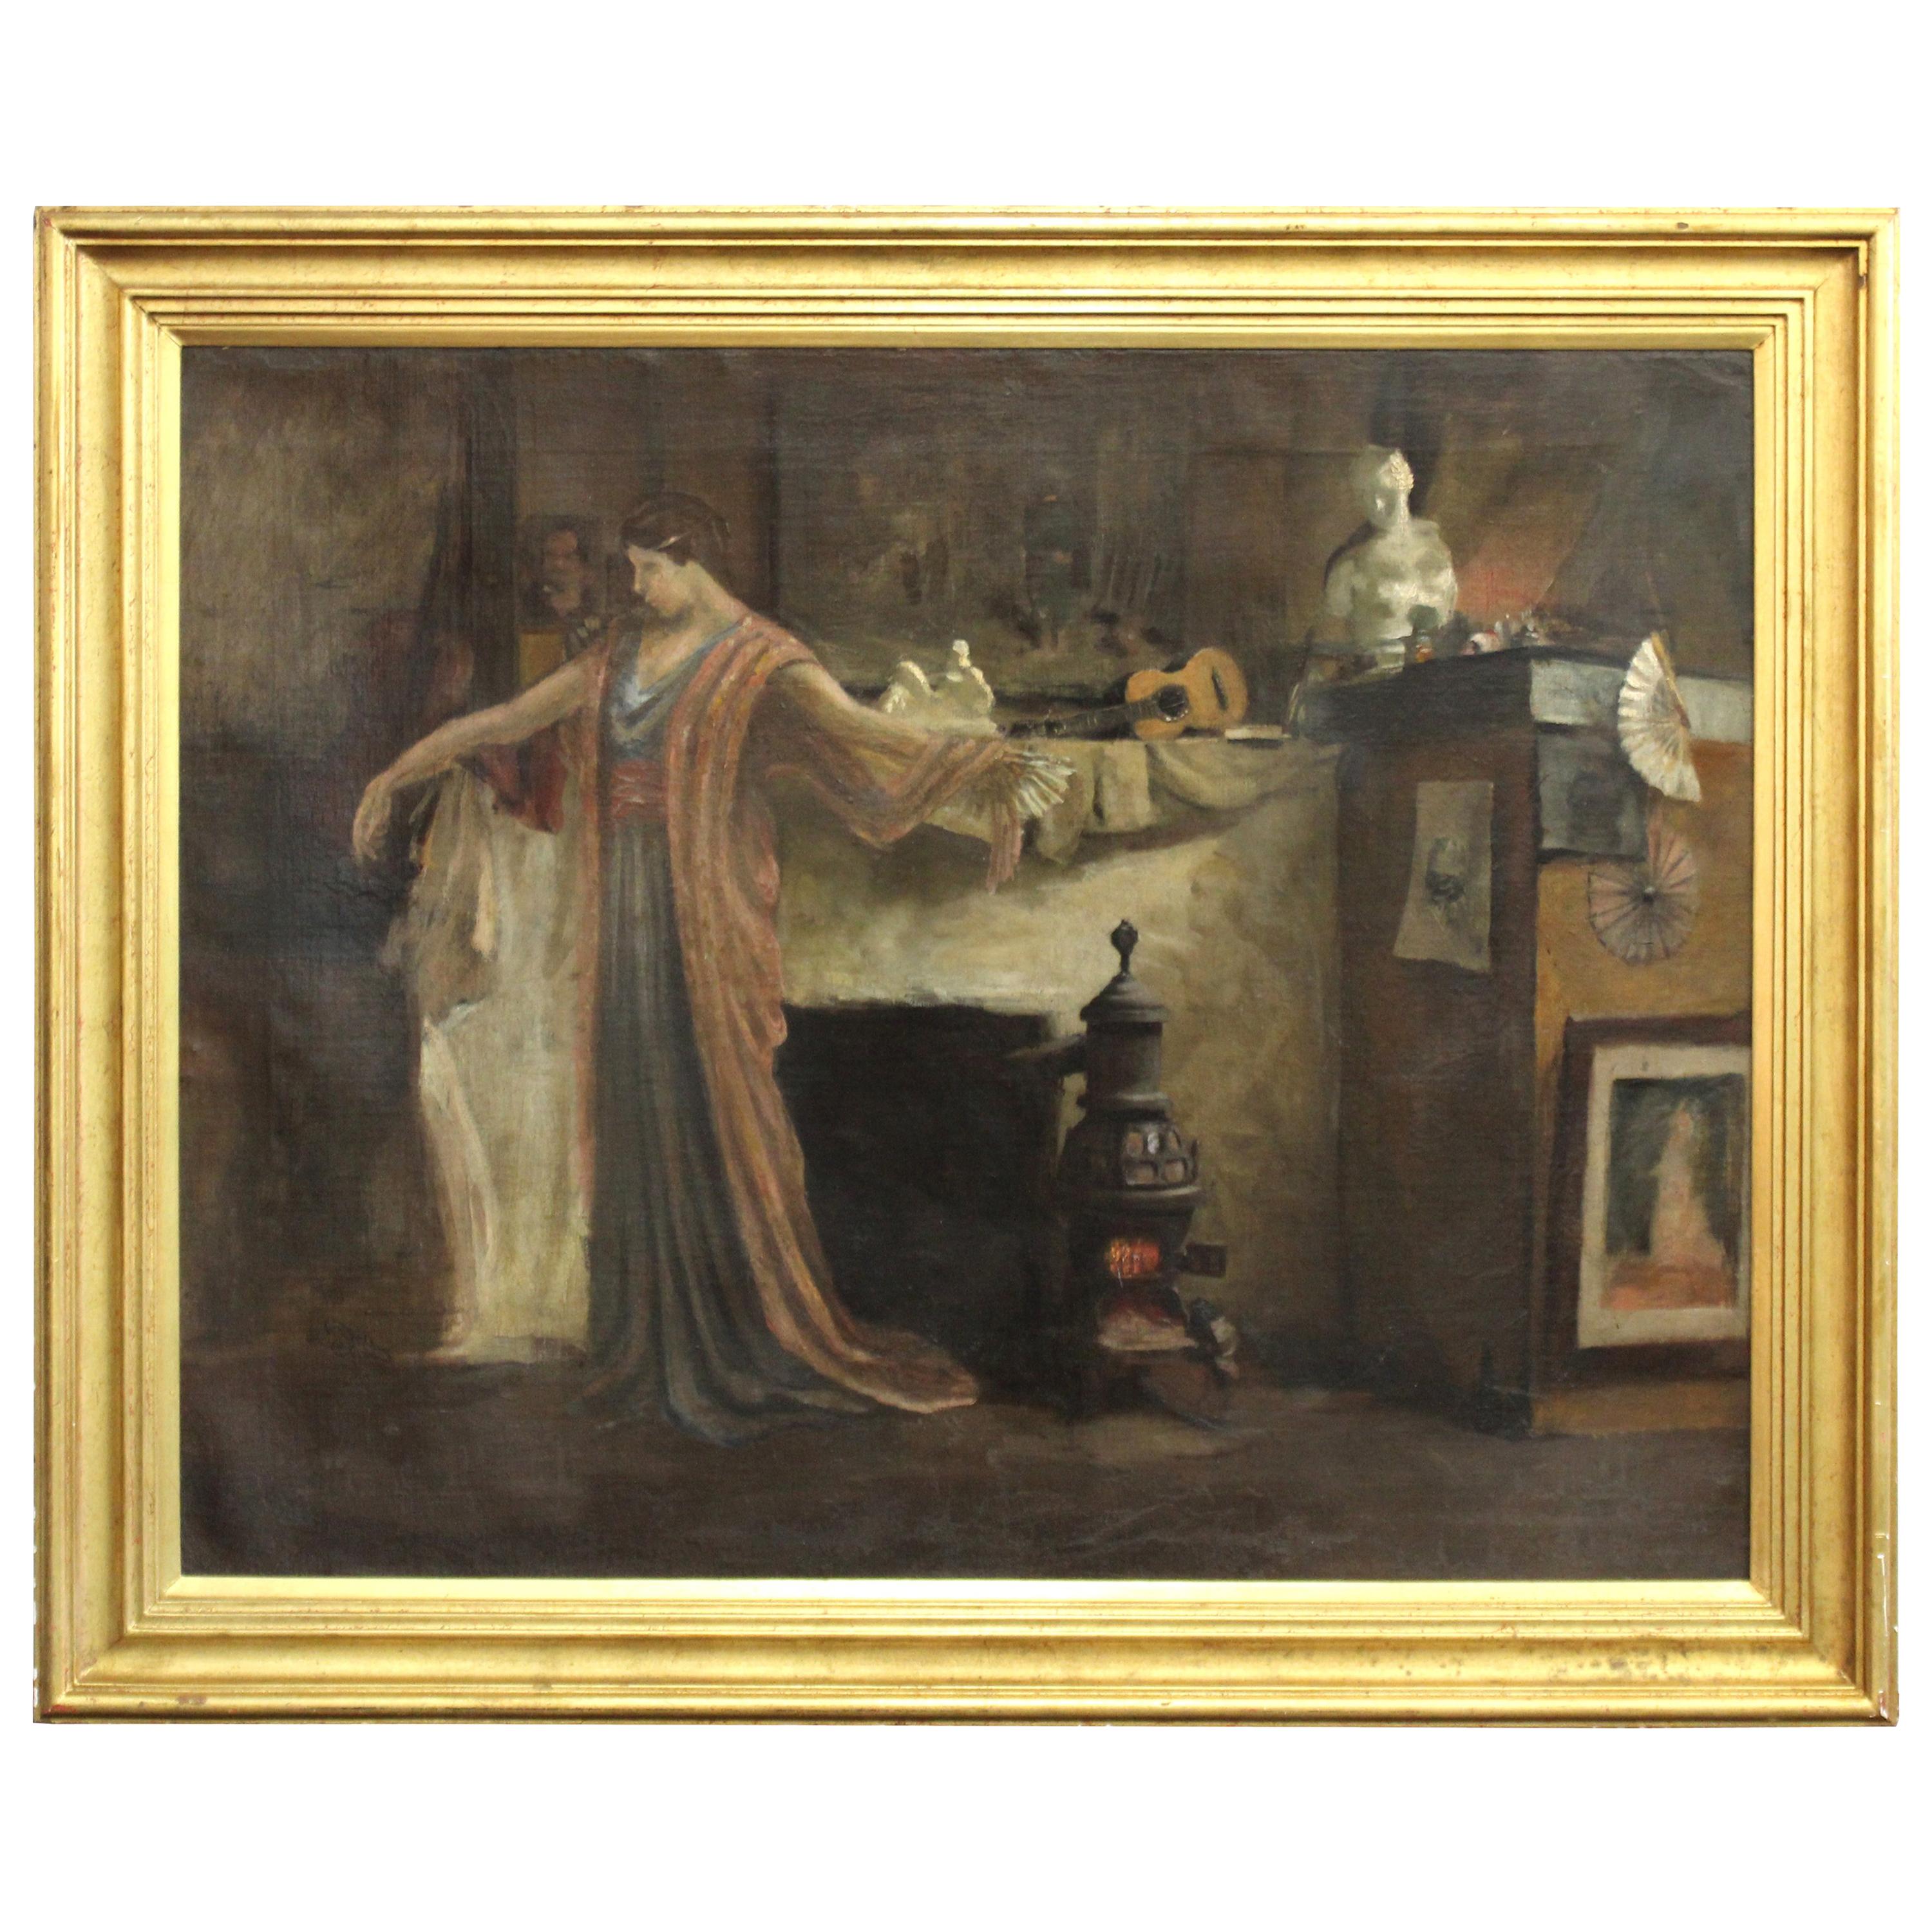 Benjamin Henry Day Jr. Gilded Age Oil Painting of an Artist Studio Interior